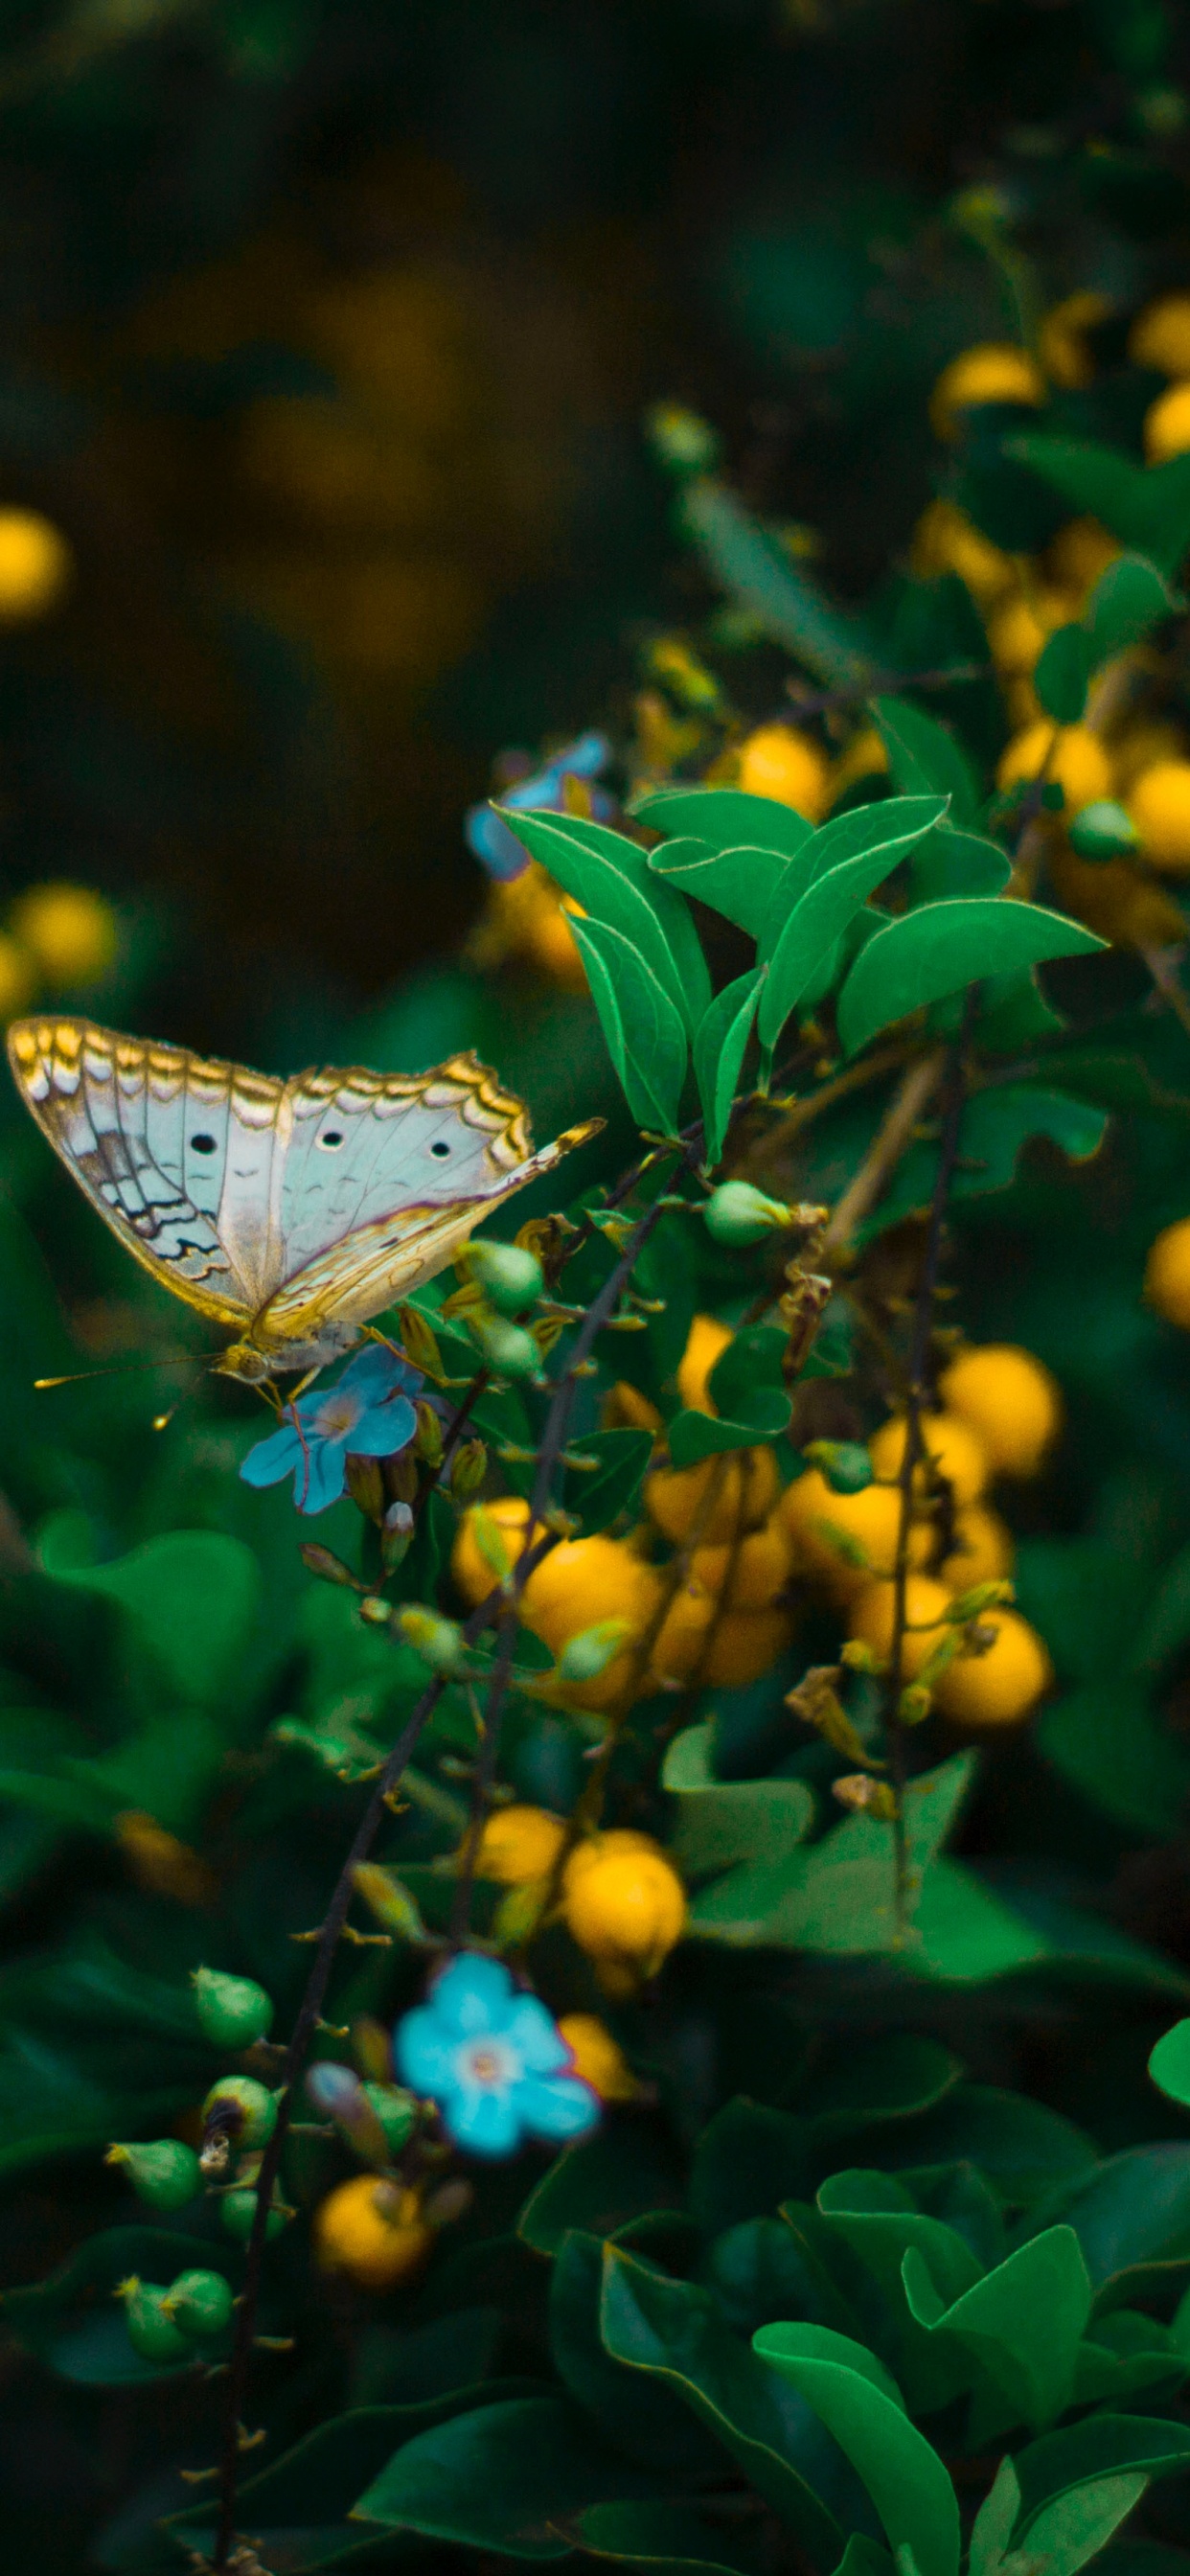 Cynthia Subgenus, Butterfly, Green, Insect, Leaf. Wallpaper in 1242x2688 Resolution